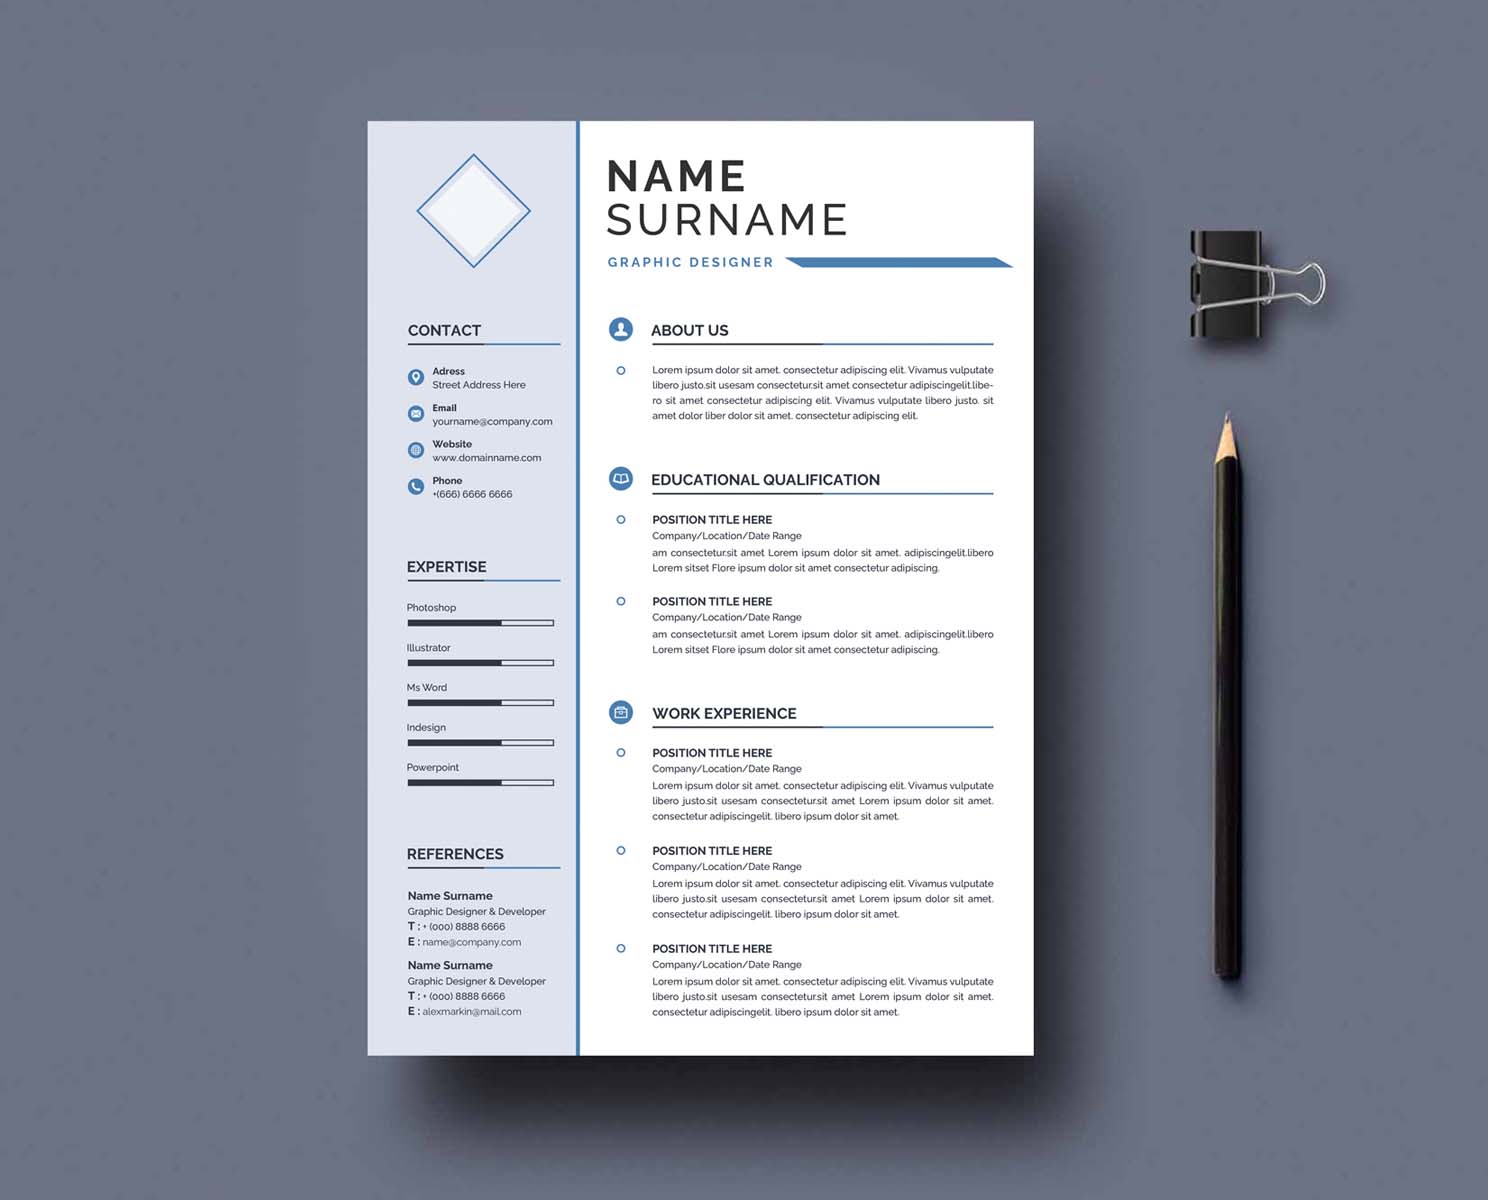 Blue and white resume with a pencil.